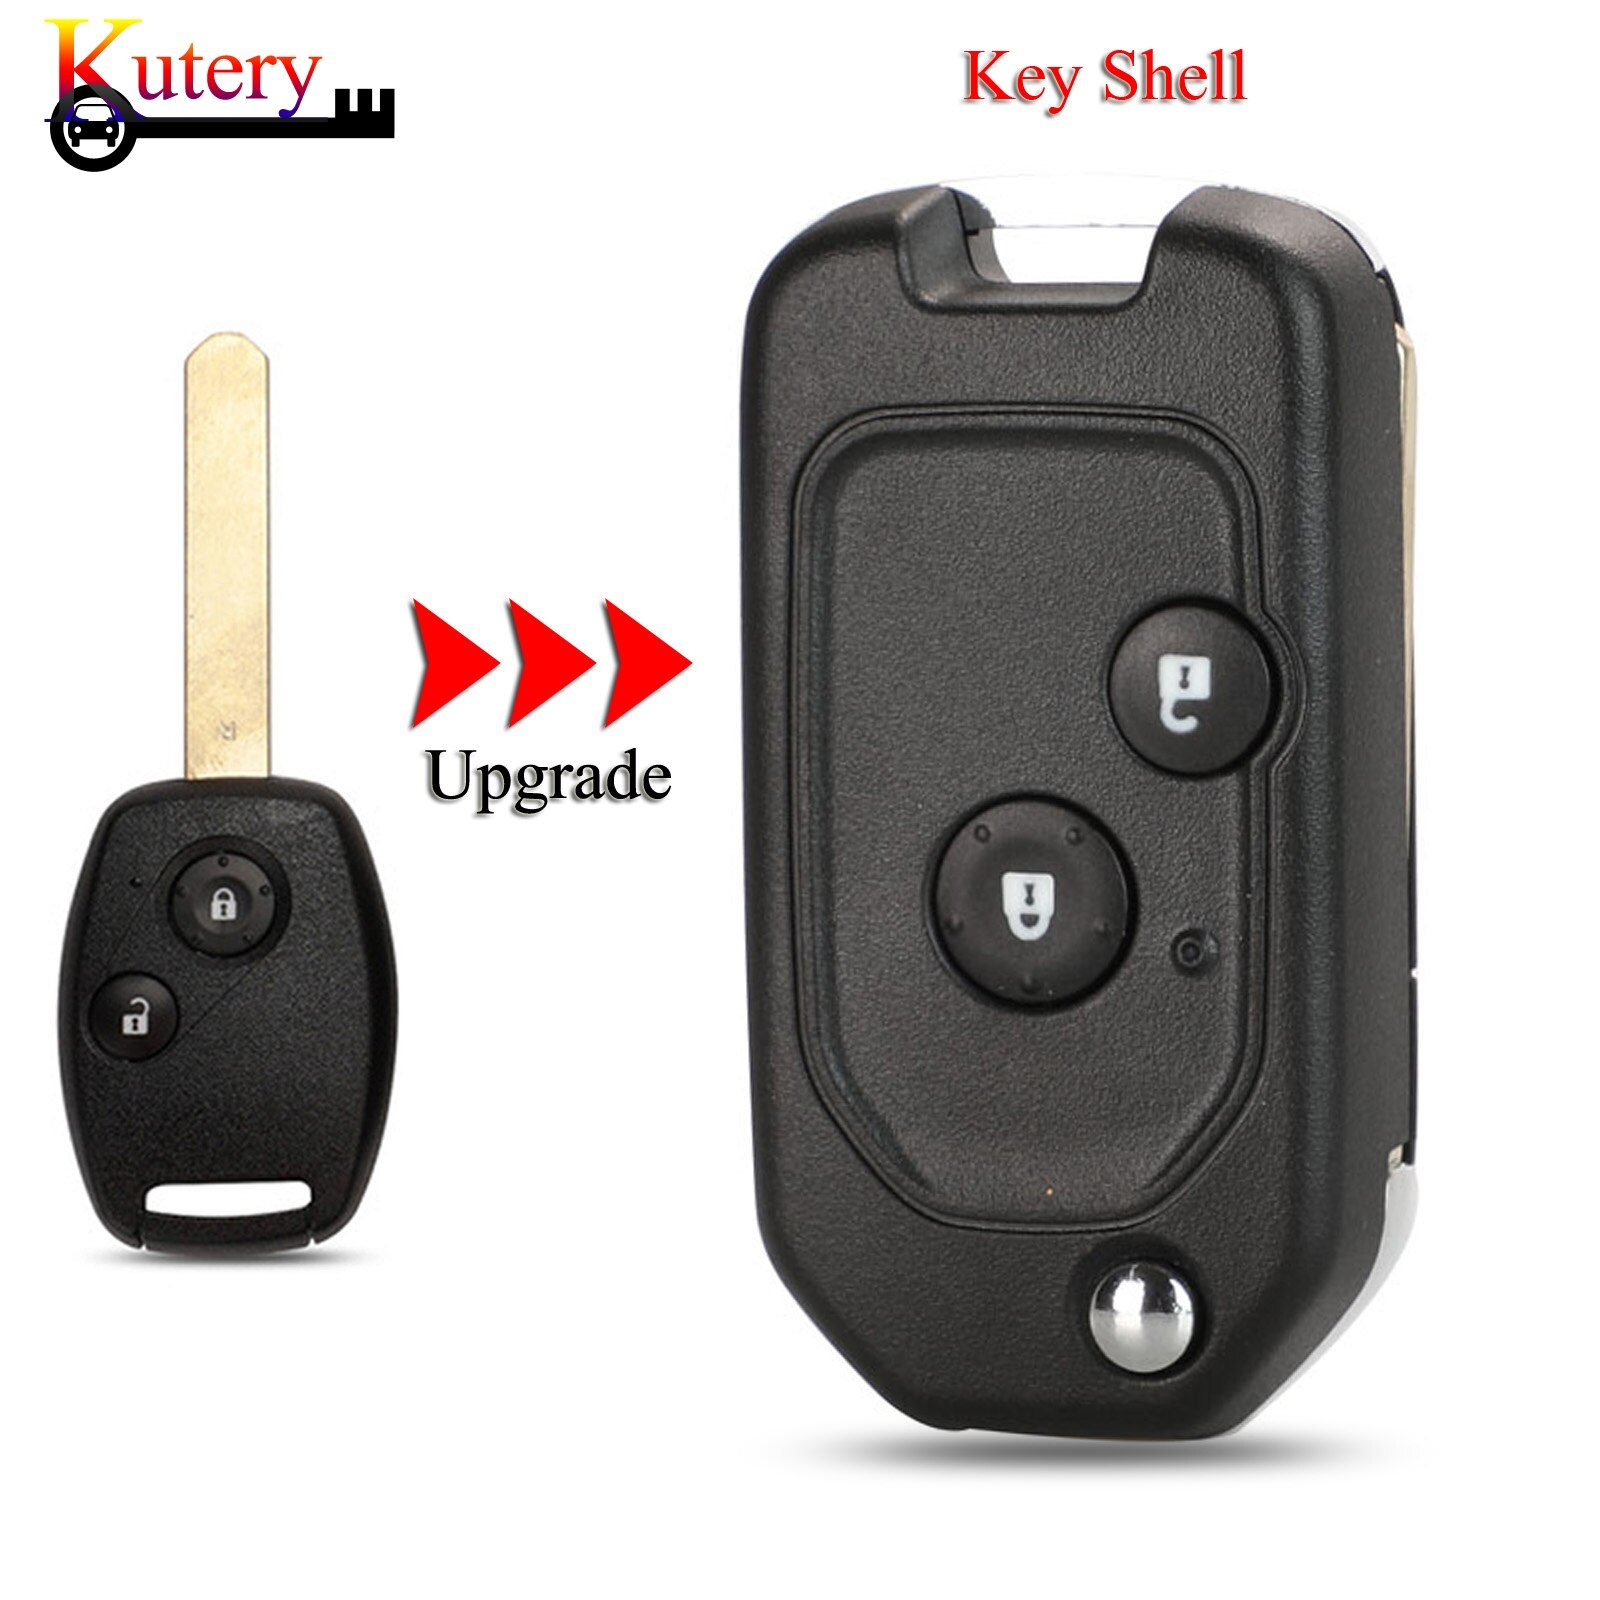 Kutery Upgrade Folding Autosleutel Shell Voor Honda Crv Fit Accord Civic Pilot 2 Knoppen Met Ongesneden Blade Blank Remote key Case Cover